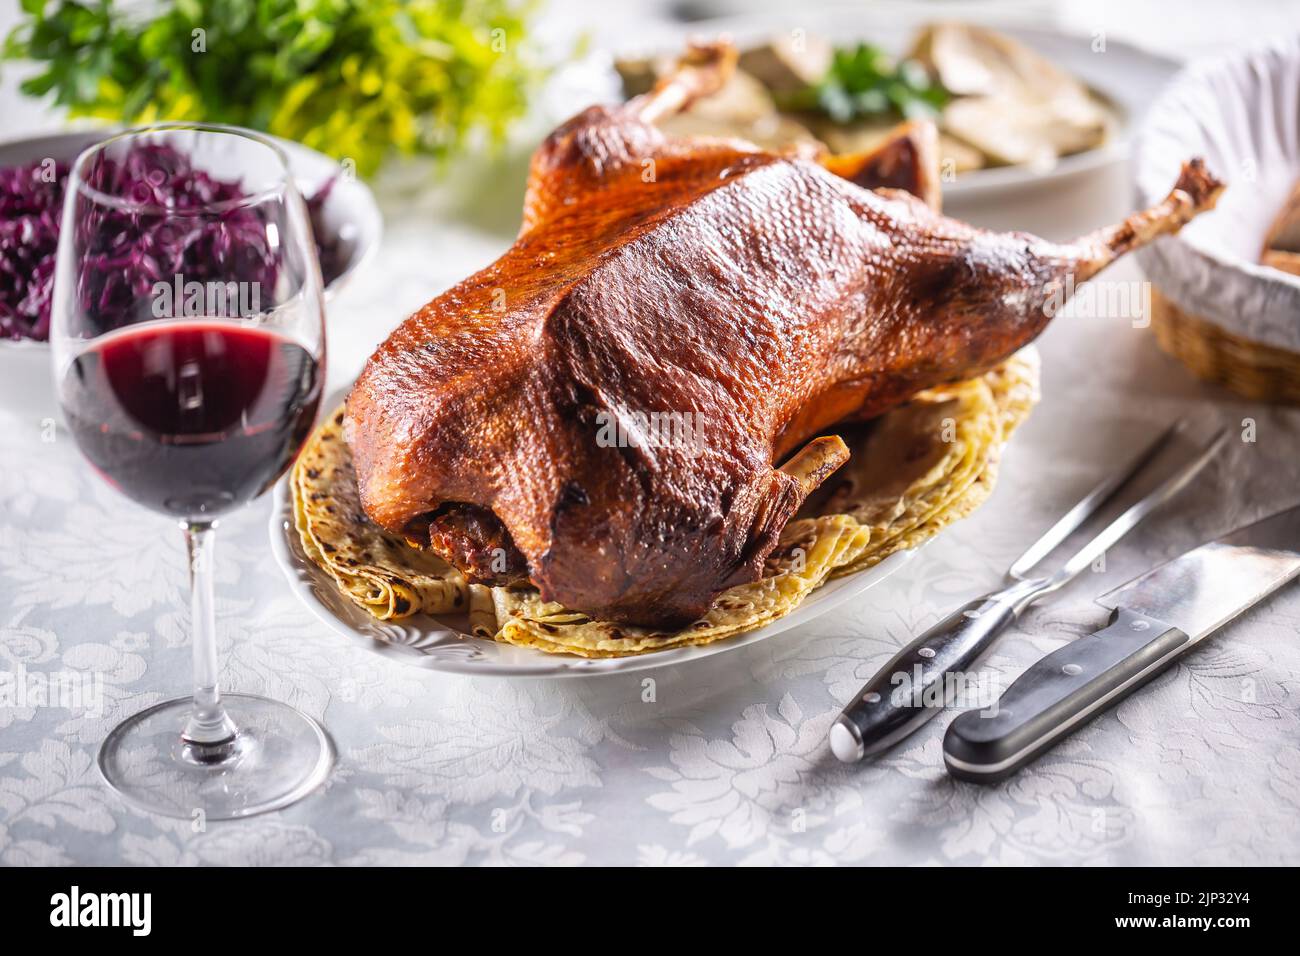 Roast goose with side dishes, red cabbage, roast, strudel, potato dumplings, pickles, bread and red wine. Traditional holiday food. Stock Photo